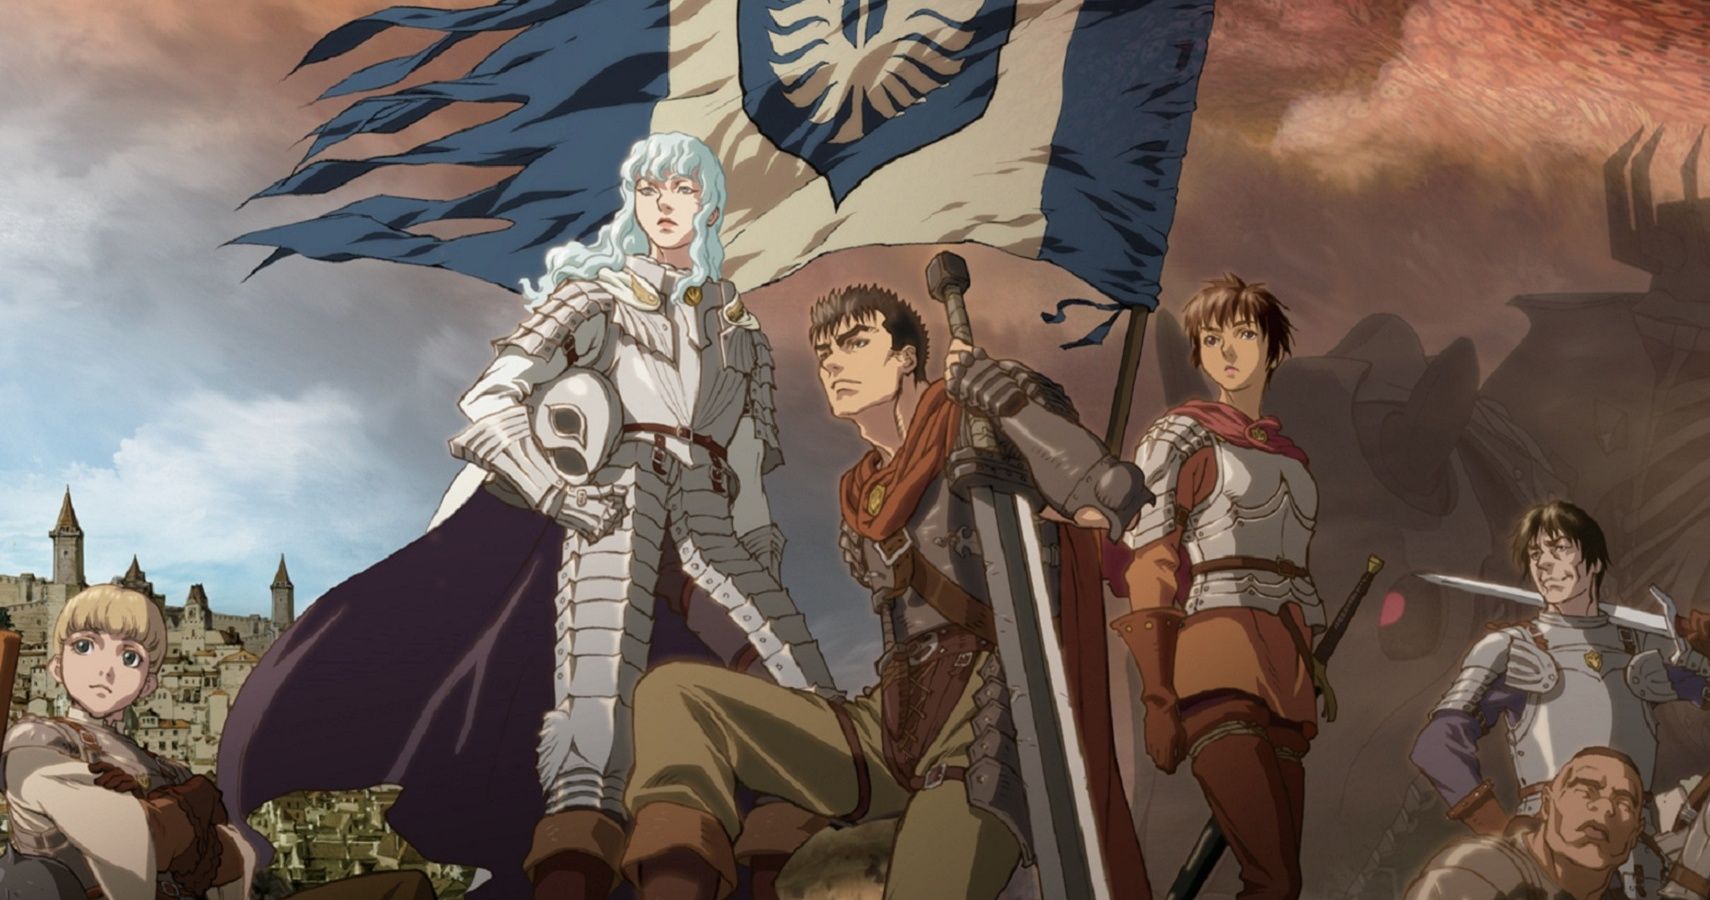 guts, casca, and griffith as the band of the hawk